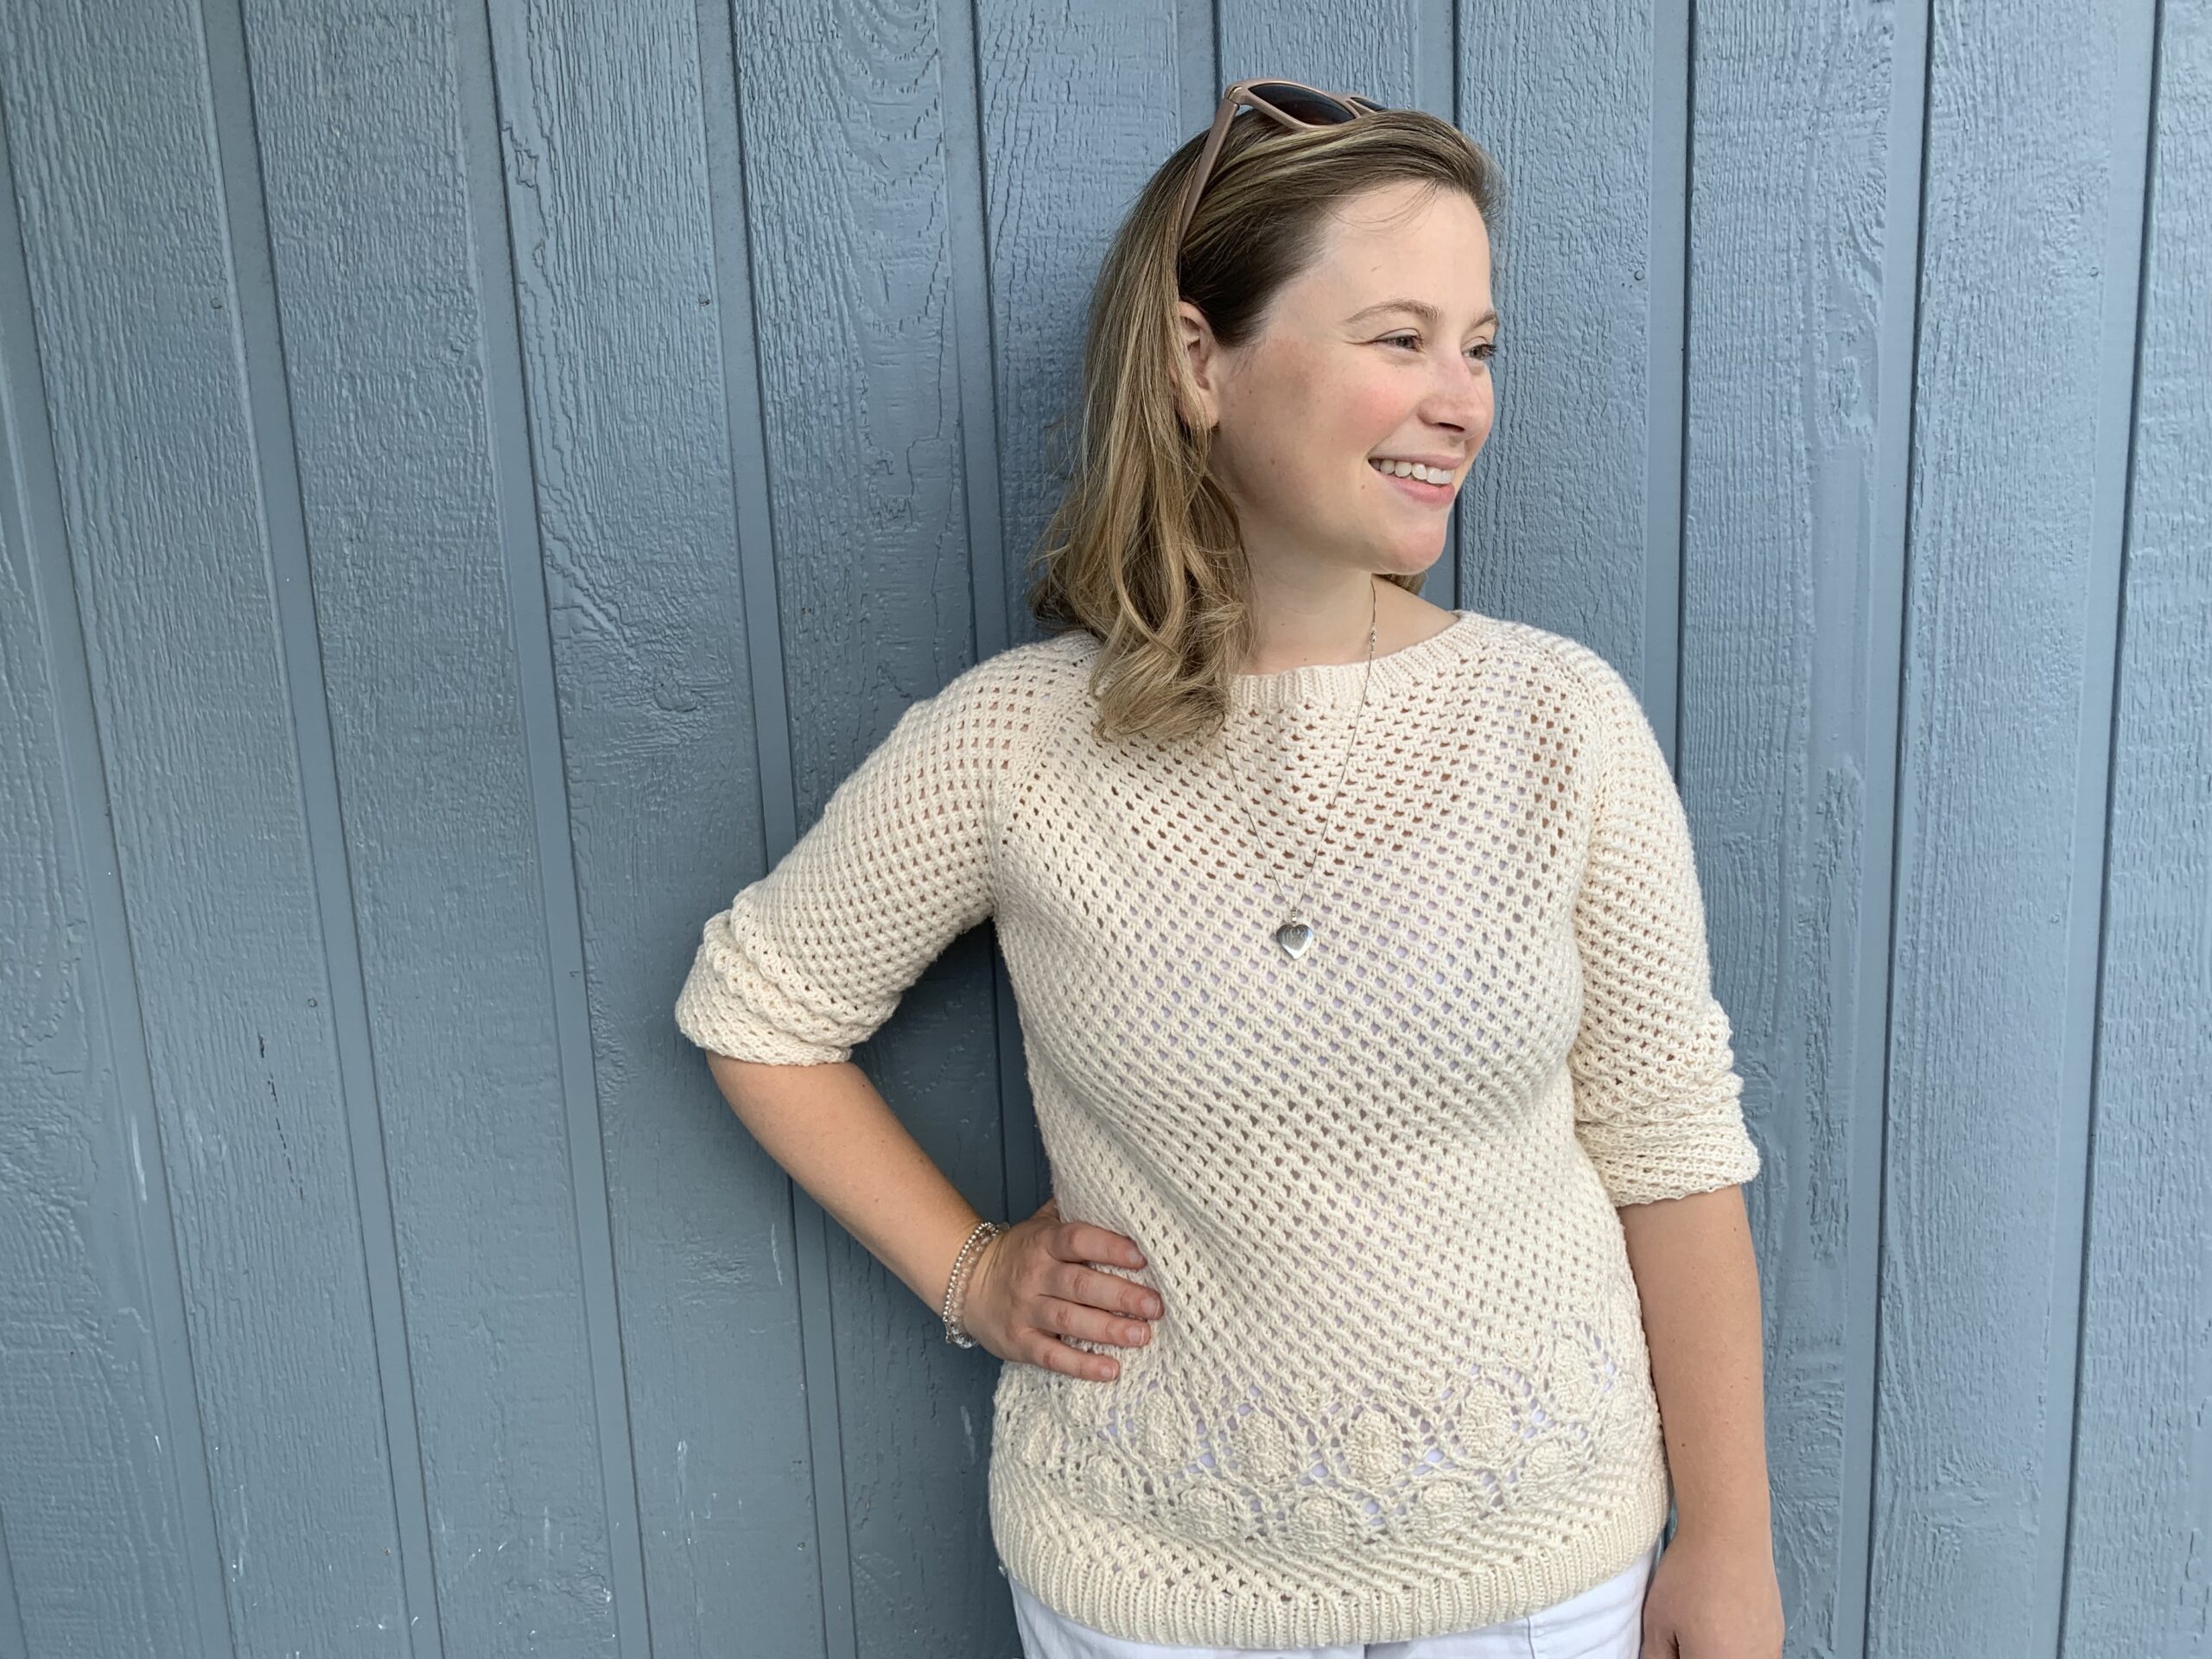 A cream pullover raglan in DK weight yarn in an allover mesh stitch with sand dollar lace motif across the hips, modelled on a woman with 1 inch positive ease